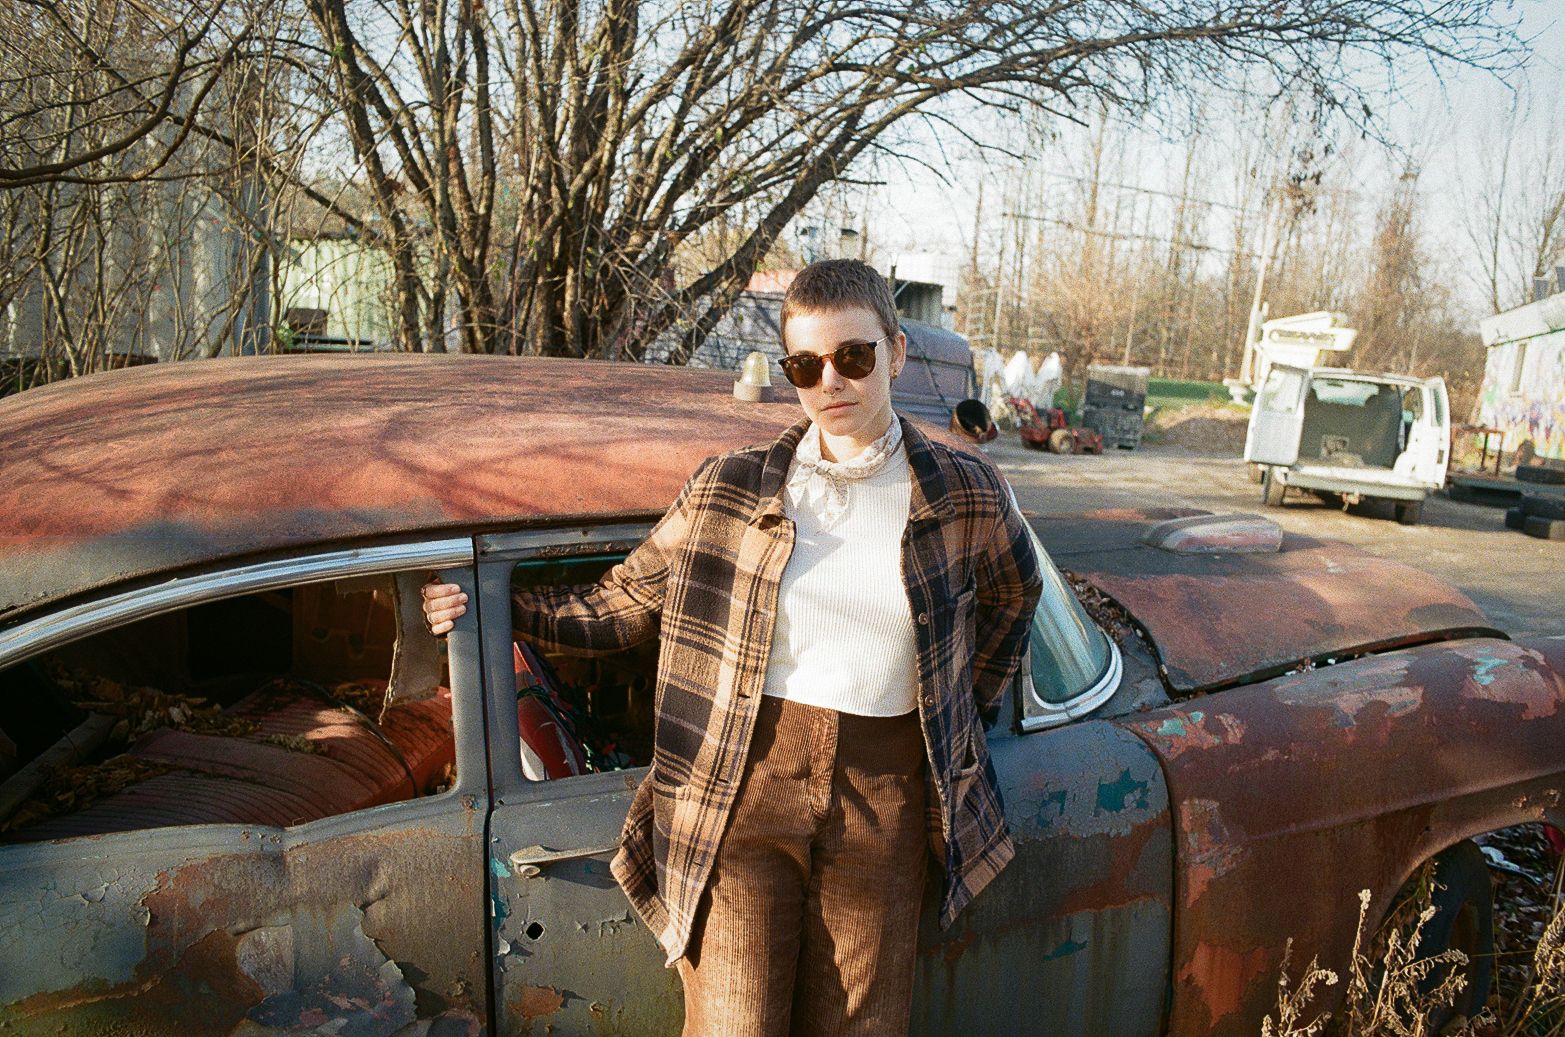 Cat Clyde portrait photo, standing next to a rusted old car and wearing sunglasses